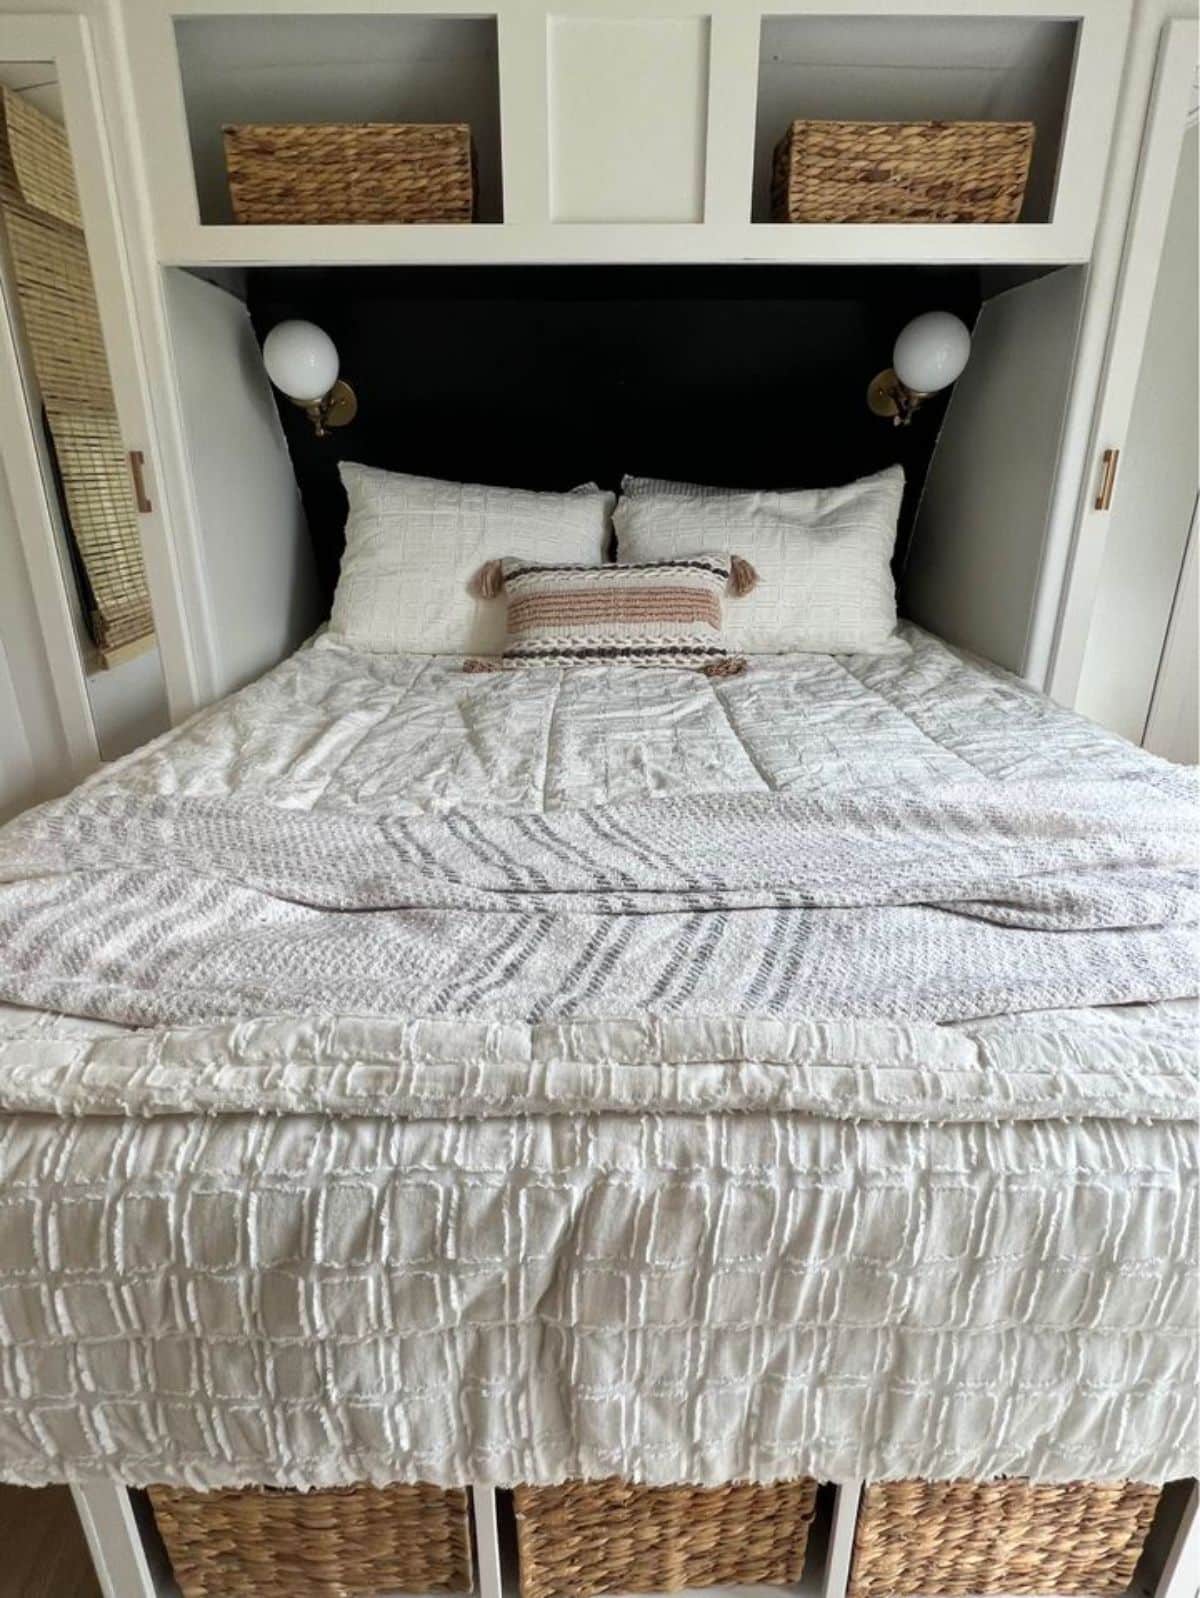 Super cozy bed installed in bedroom with side tables and storage